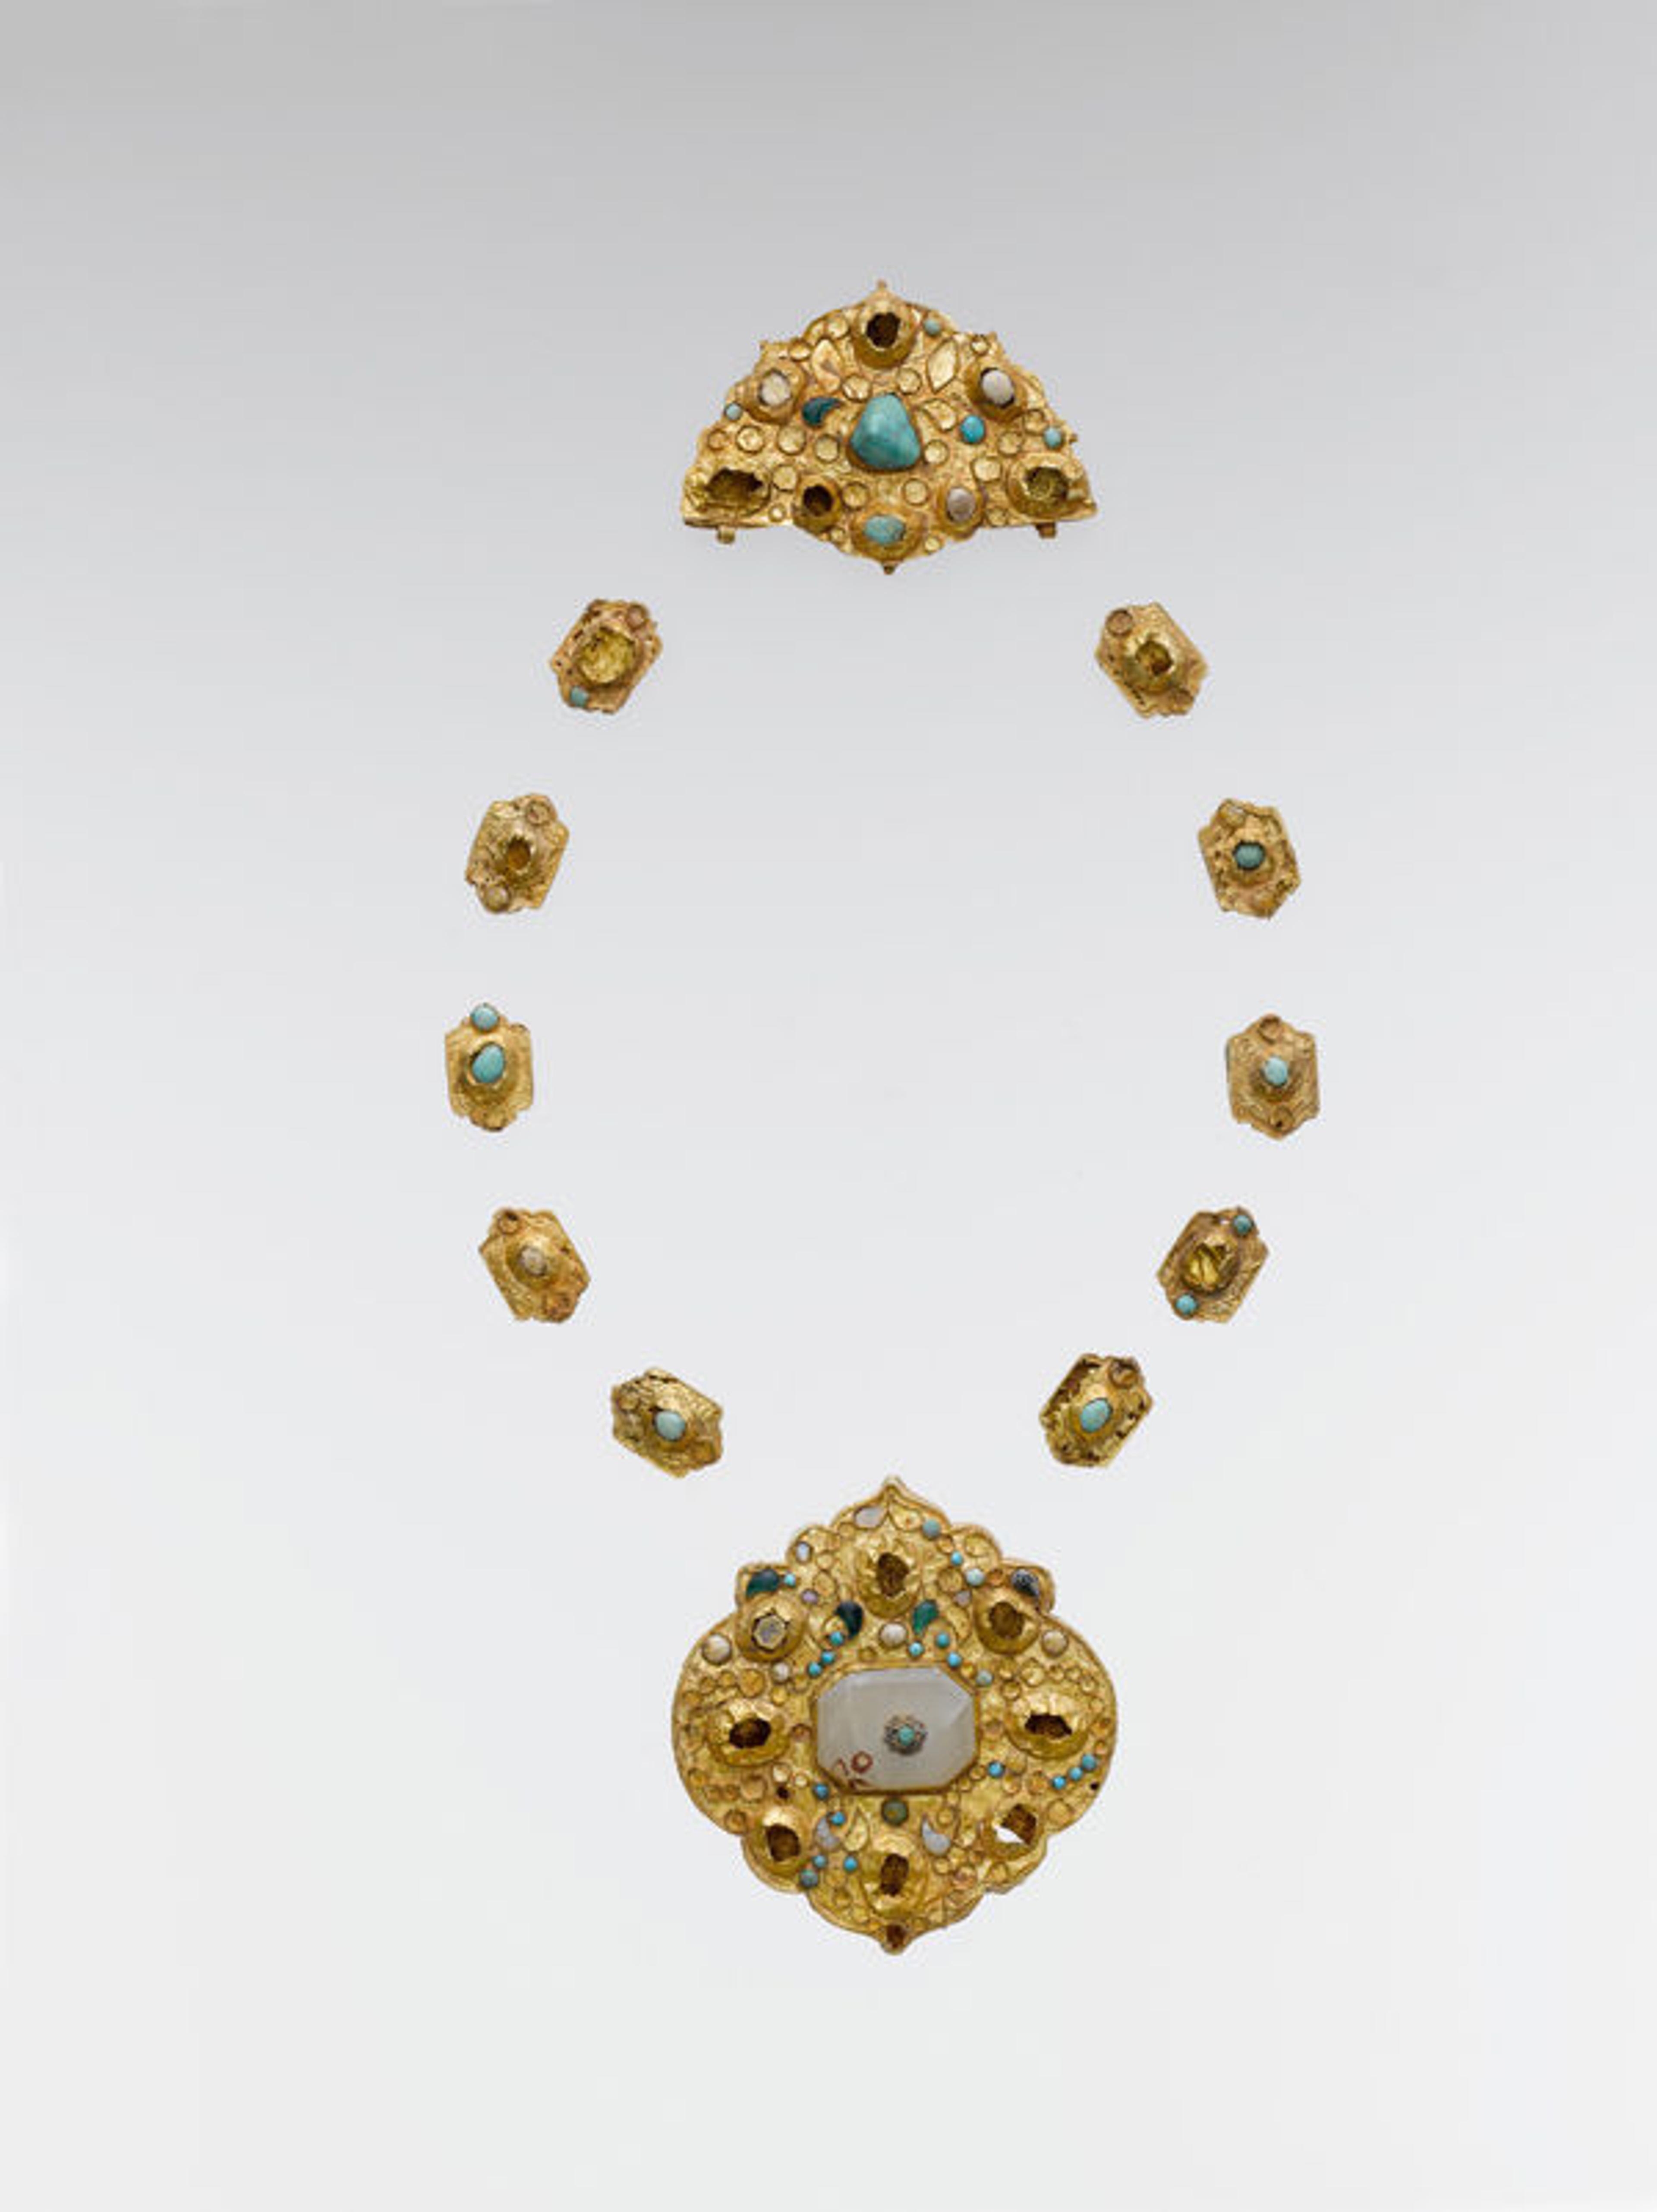 Jewelry Elements, late 14th–16th century. Iran or Central Asia, Islamic. Gold sheet; worked, chased, and set with turquoise, gray chalcedony, and glass; Large medallion: H. 2 7/8 in. (7.3 cm) W. 2 3/4 in. (7 cm) Half medallion: H. 1 3/4 in. (4.4 cm) W. 2 3/4 in. (7 cm) Cartouches: H. 3/4 in. (1.9 cm) W. 1/2 in. (1.3 cm). The Metropolitan Museum of Art, New York, Purchase, Rogers Fund and Habib Anavian Gift, 1989 (1989.87a–l)